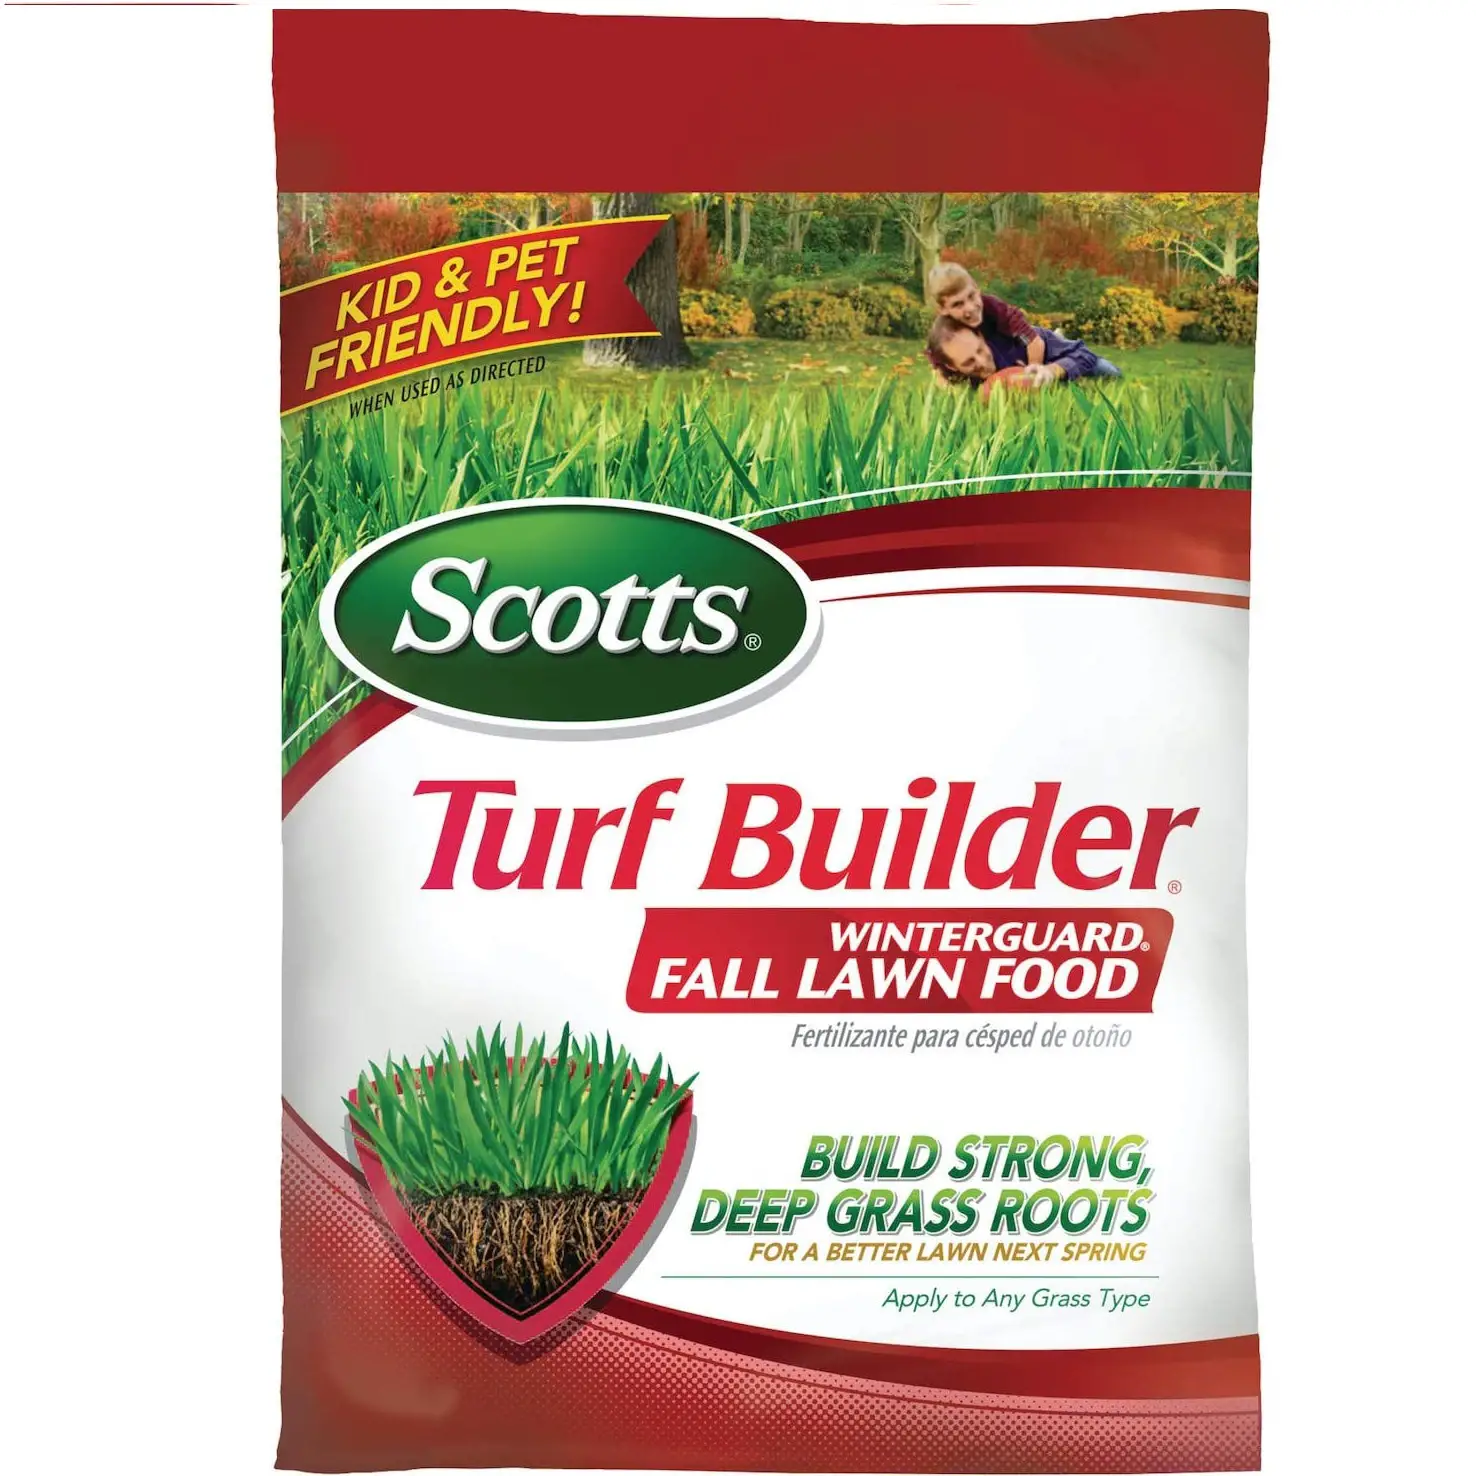 What Is The Best Fertilizer For Grass In The Fall